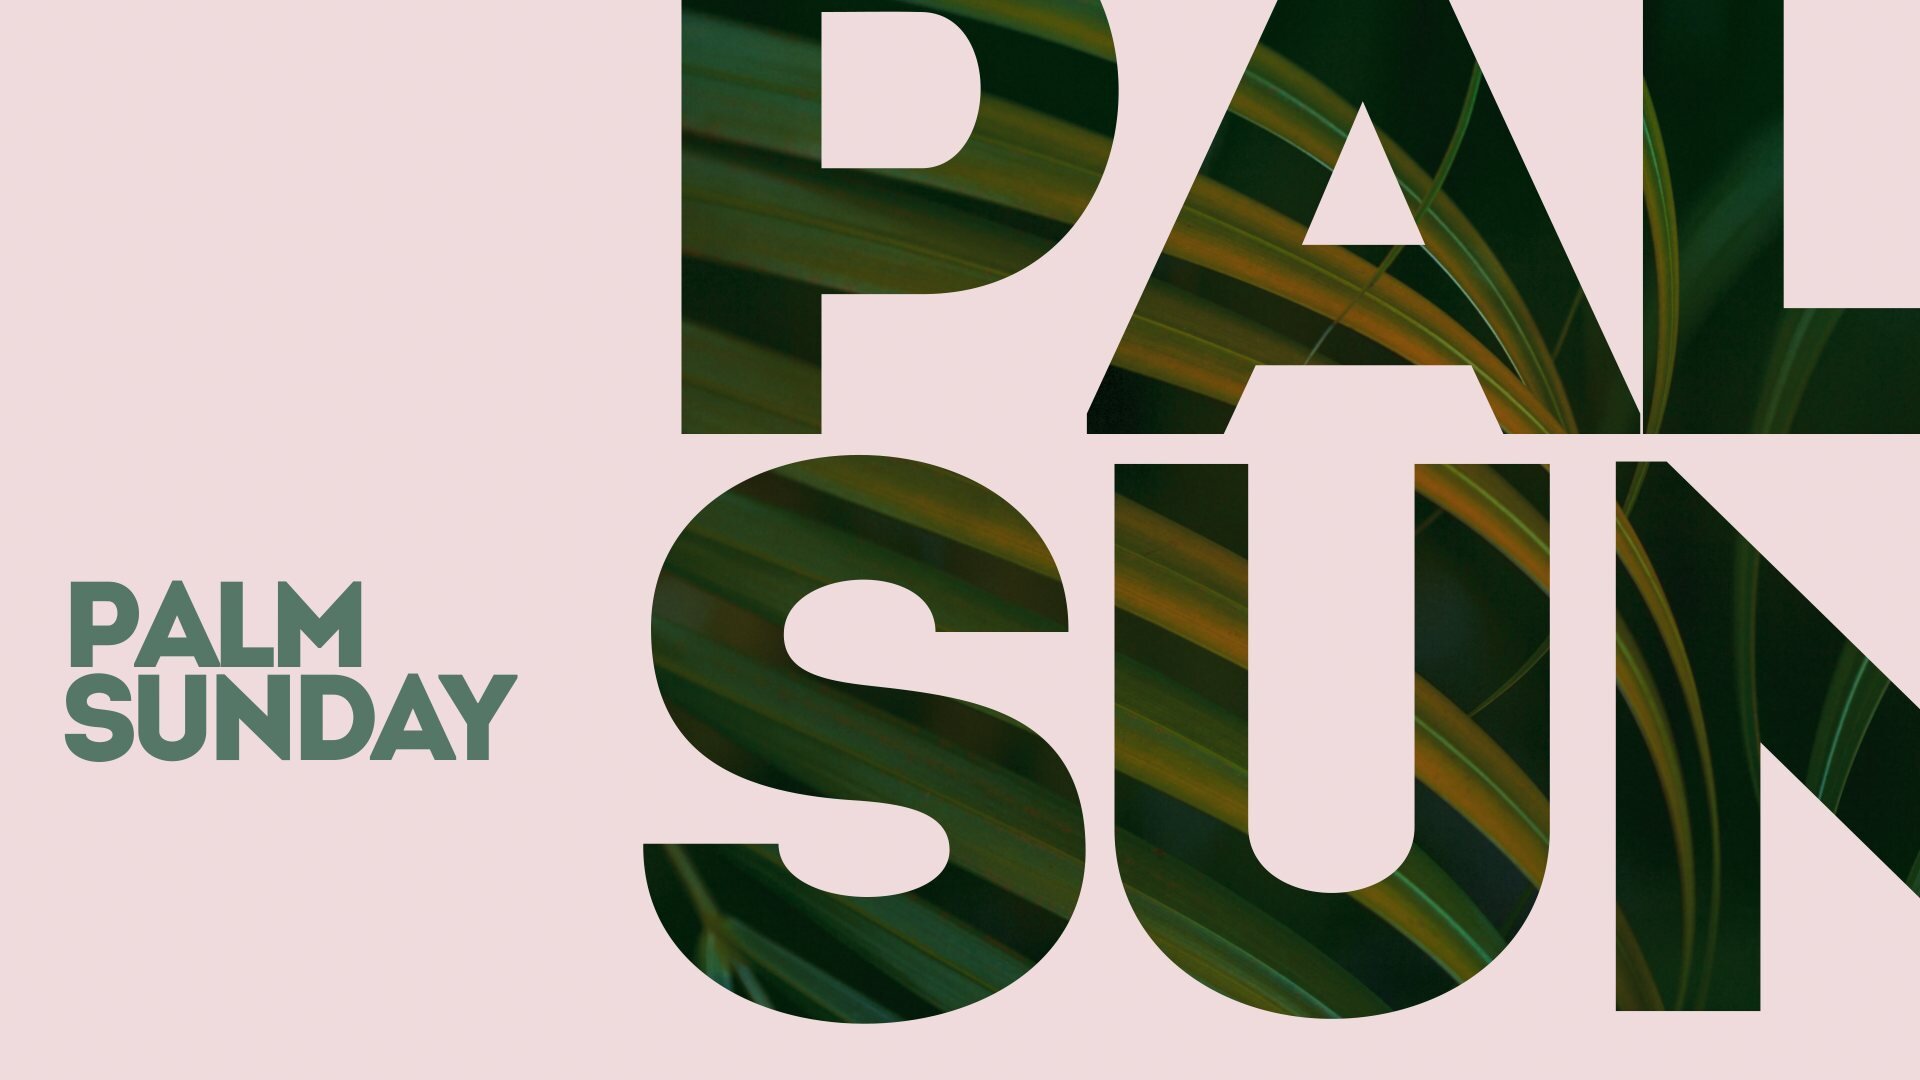 Join us this Sunday as we celebrate Palm Sunday! It's a day of significance as we commemorate Jesus' triumphant entry into Jerusalem. Let's come together to honor this momentous occasion and reflect on its meaning. You're invited to our services as w